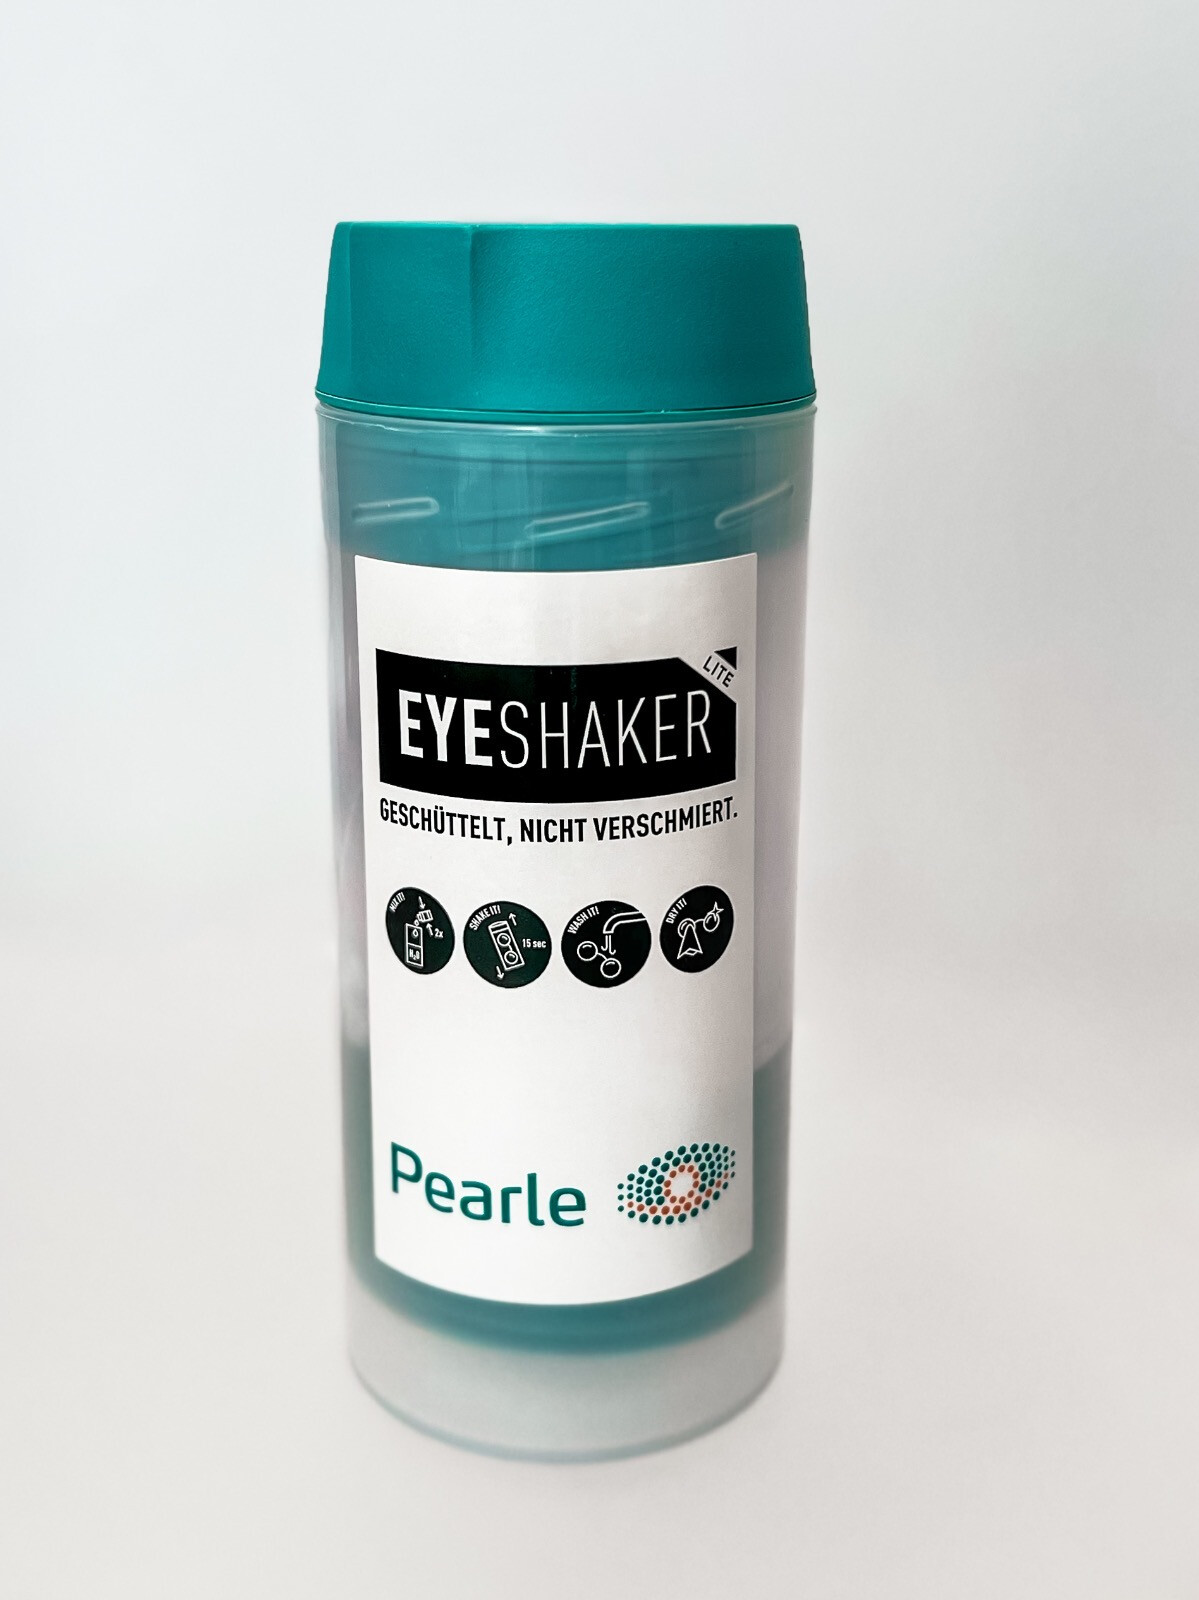 [products.image.front] Apollo Eyeshaker PA Accessoire